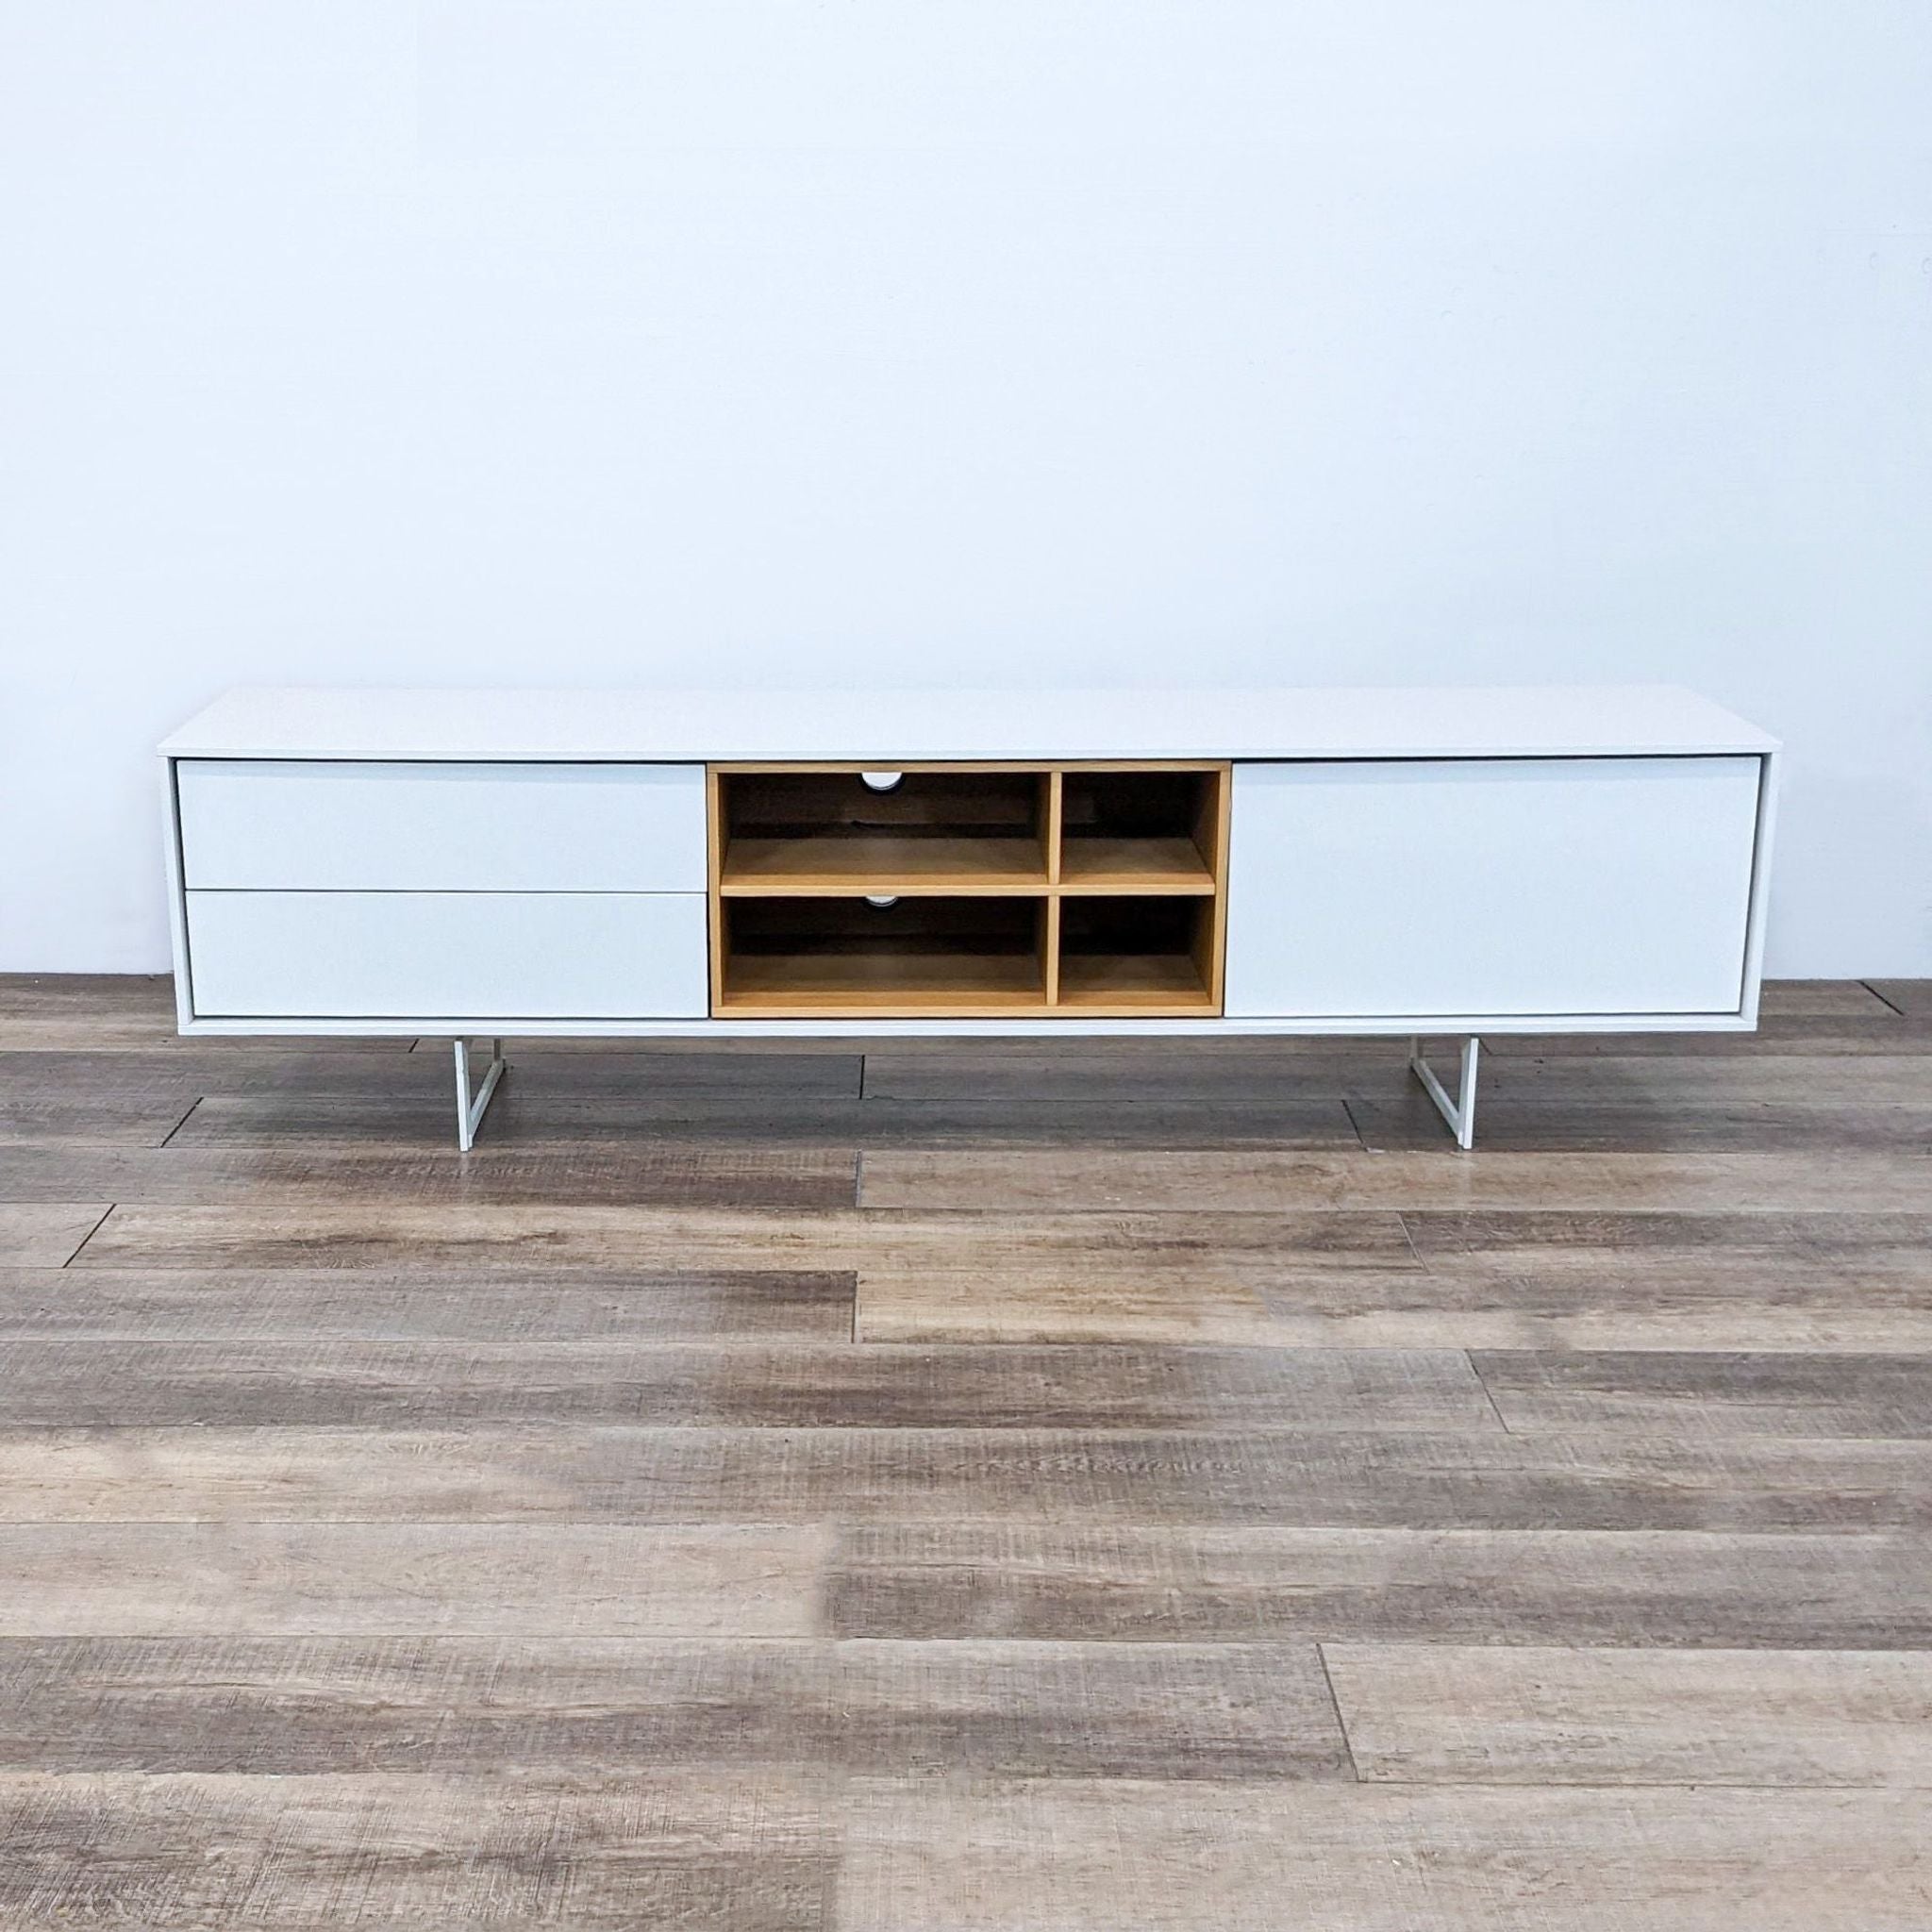 Treku Aura Media Unit with white lacquer, wood veneer finish, and steel base, showcasing a two-tone design with open shelving and drawers.